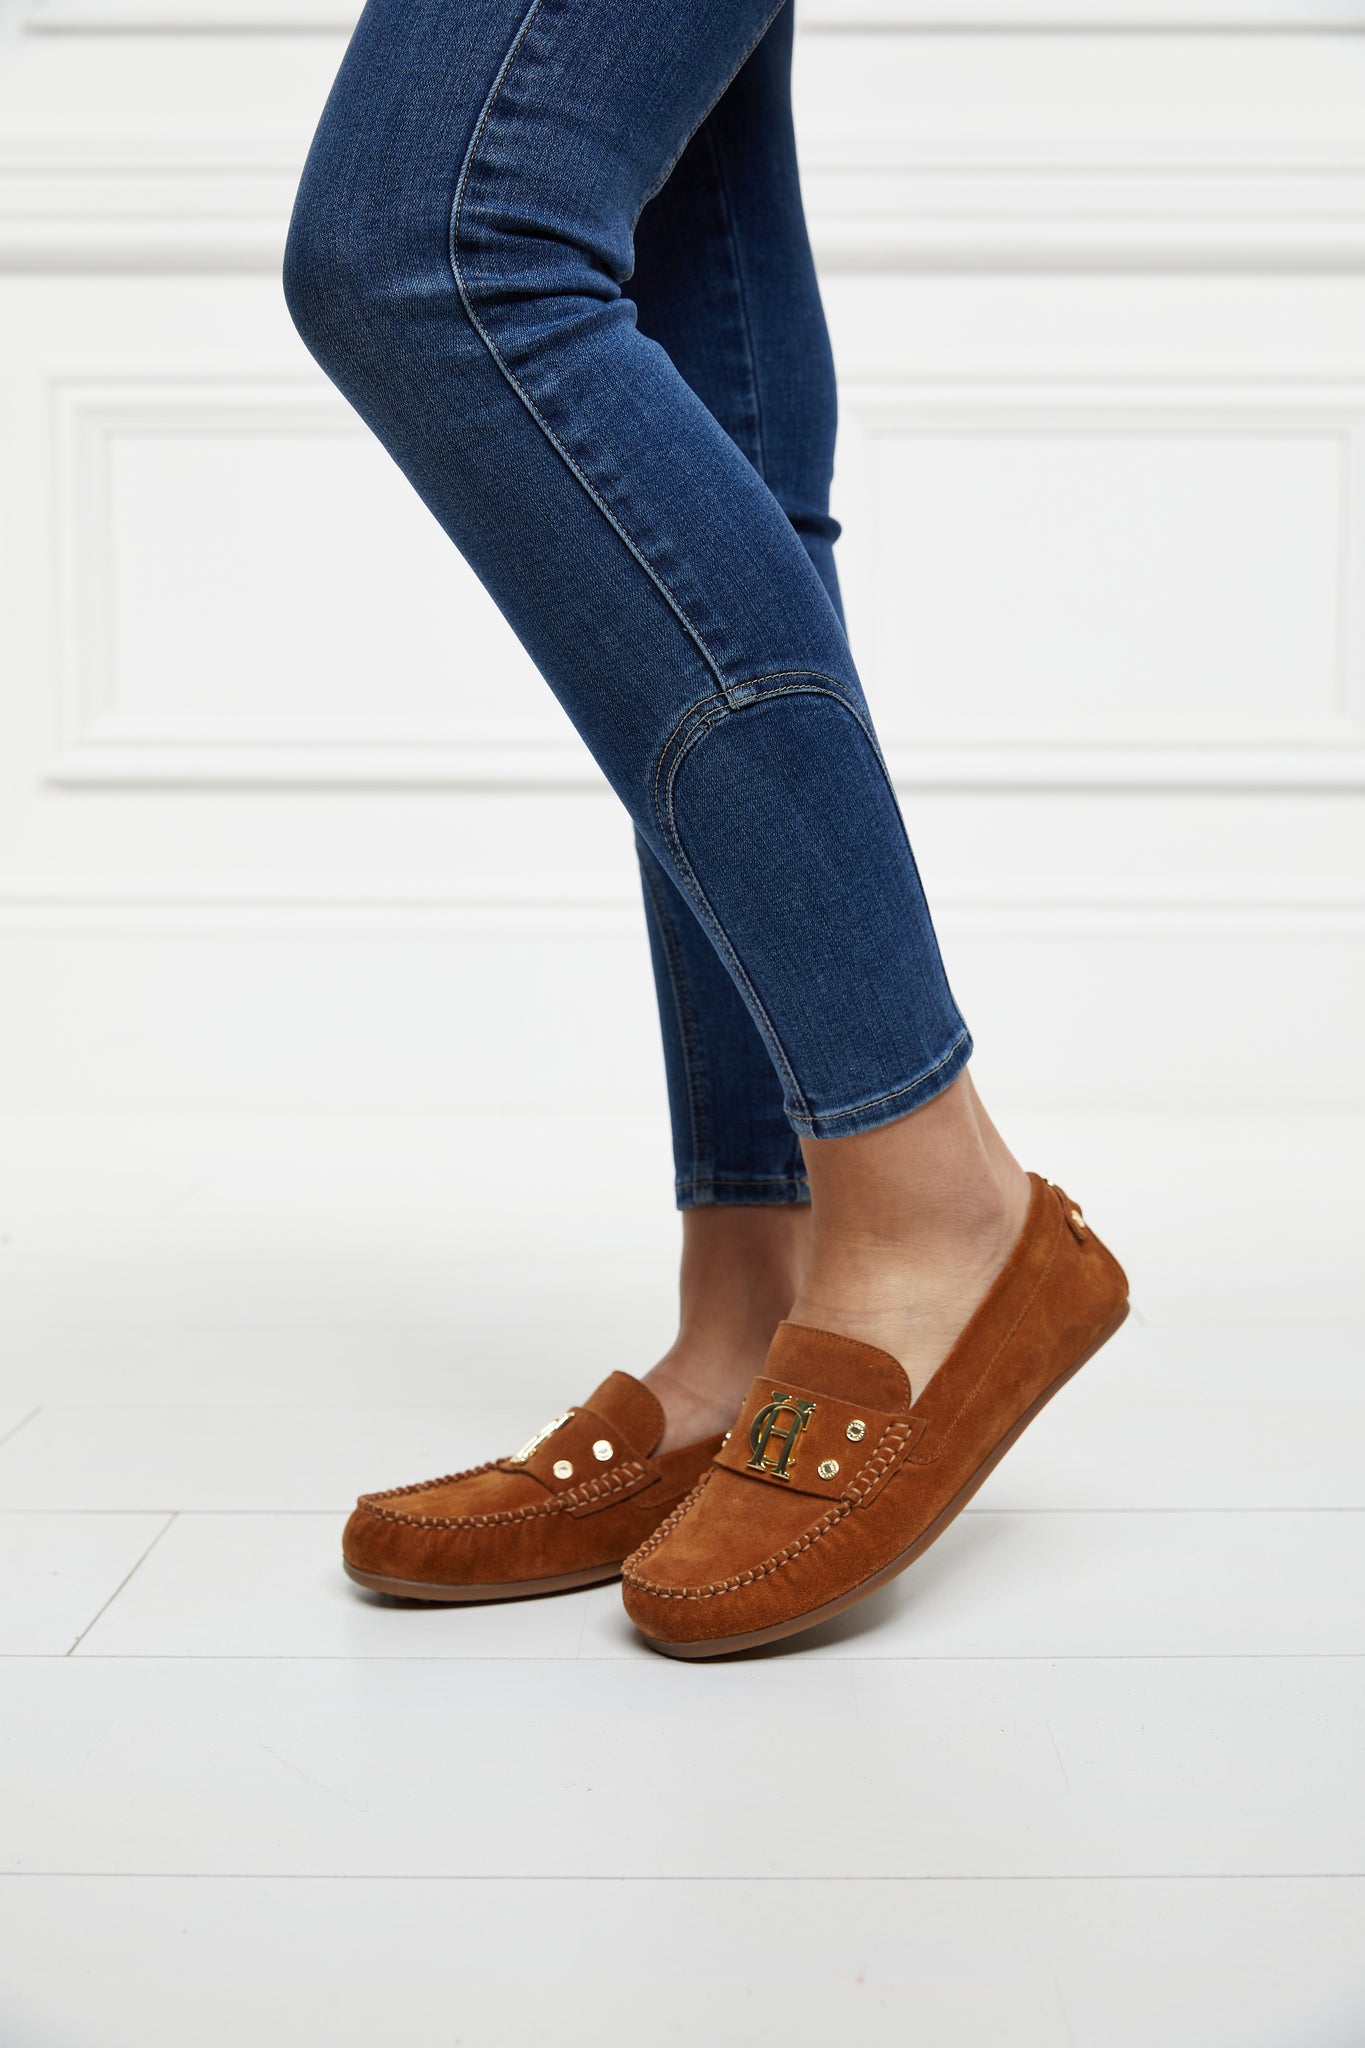 classic tan suede loafers with a leather sole and top stitching details and gold hardware paired with denim skinny jeans